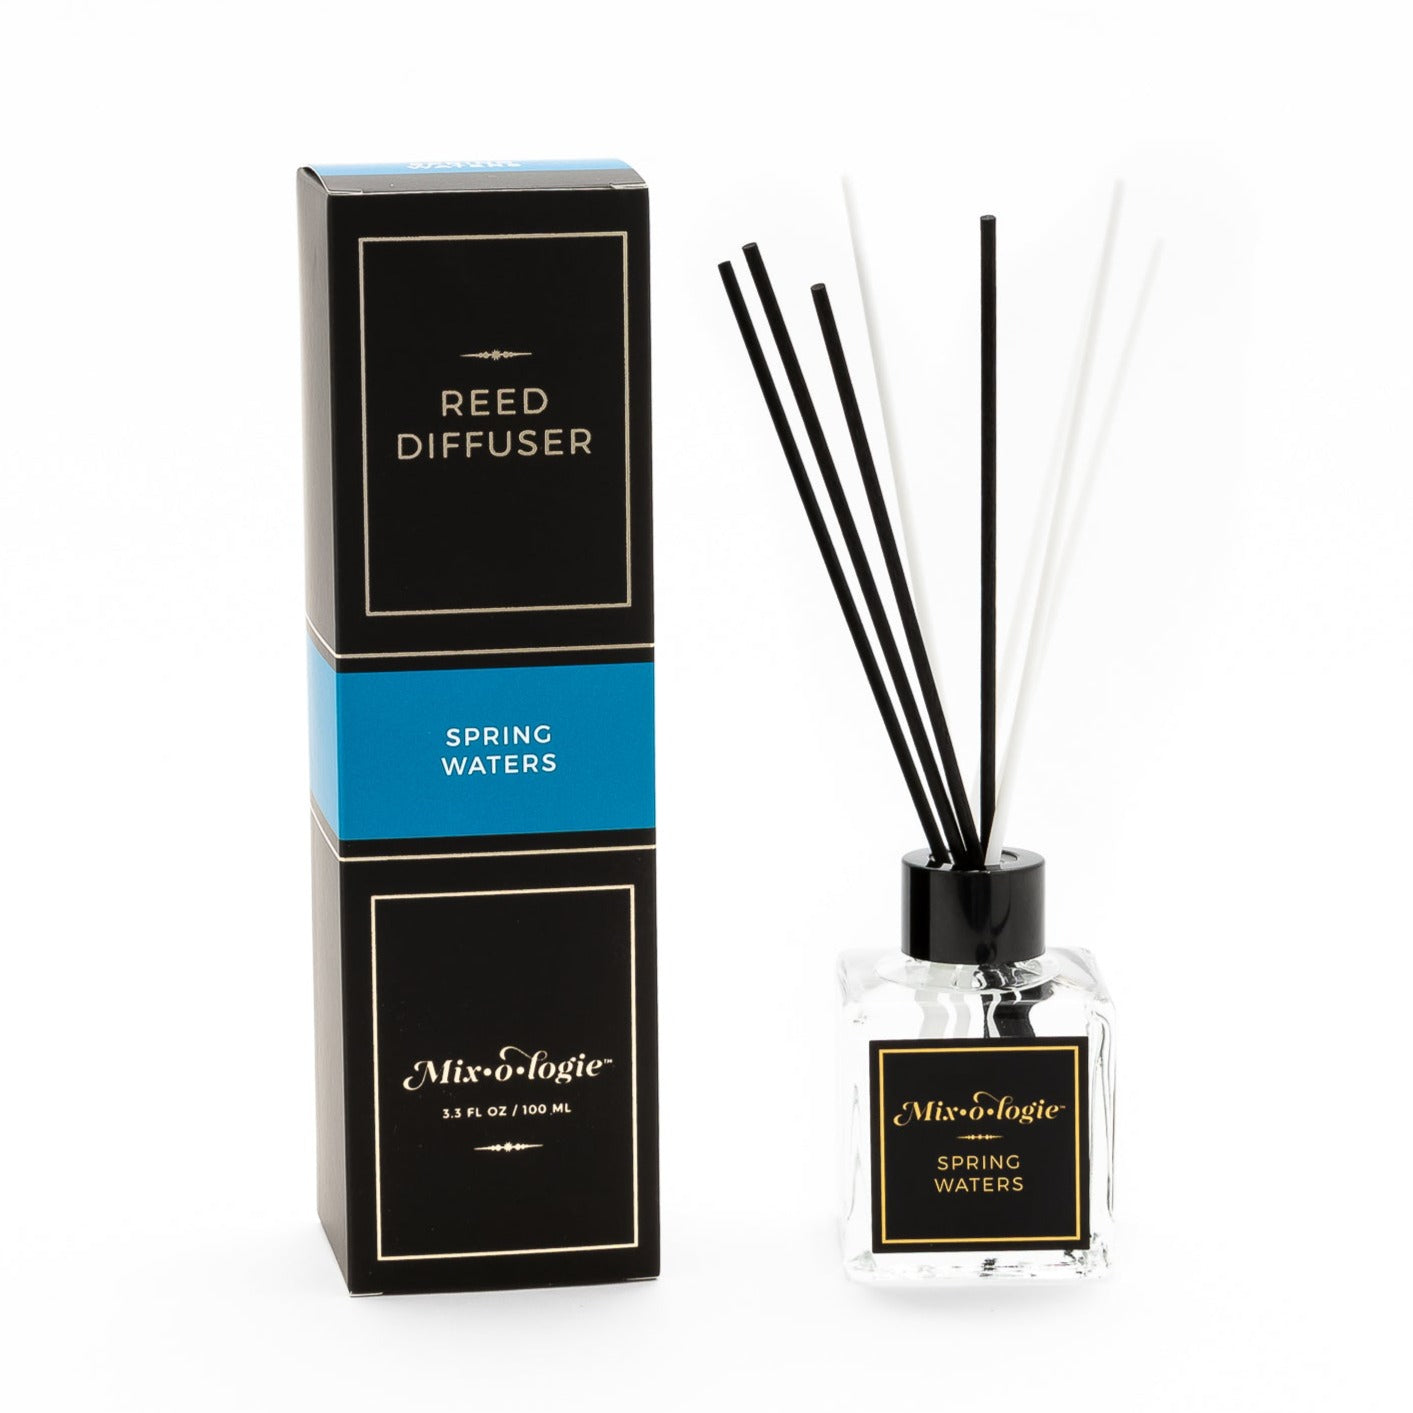 Spring Waters - Reed Diffuser